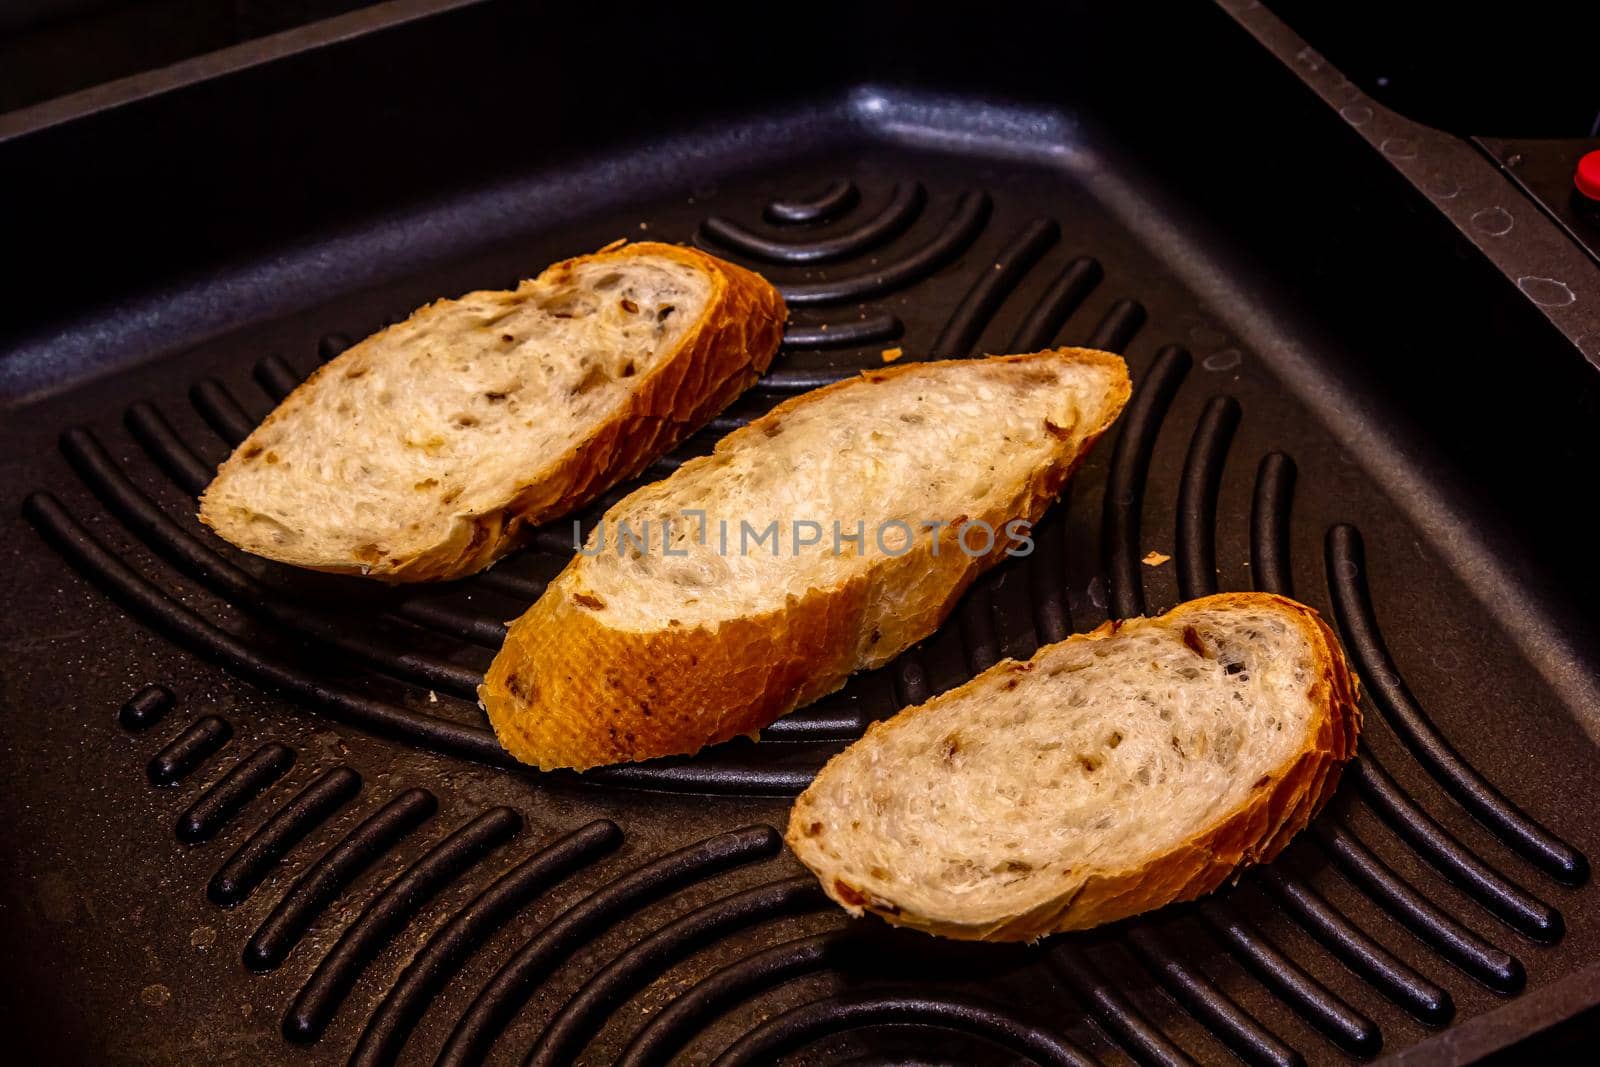 White bread toasted on an outdoor Grill on wooden table by Milanchikov